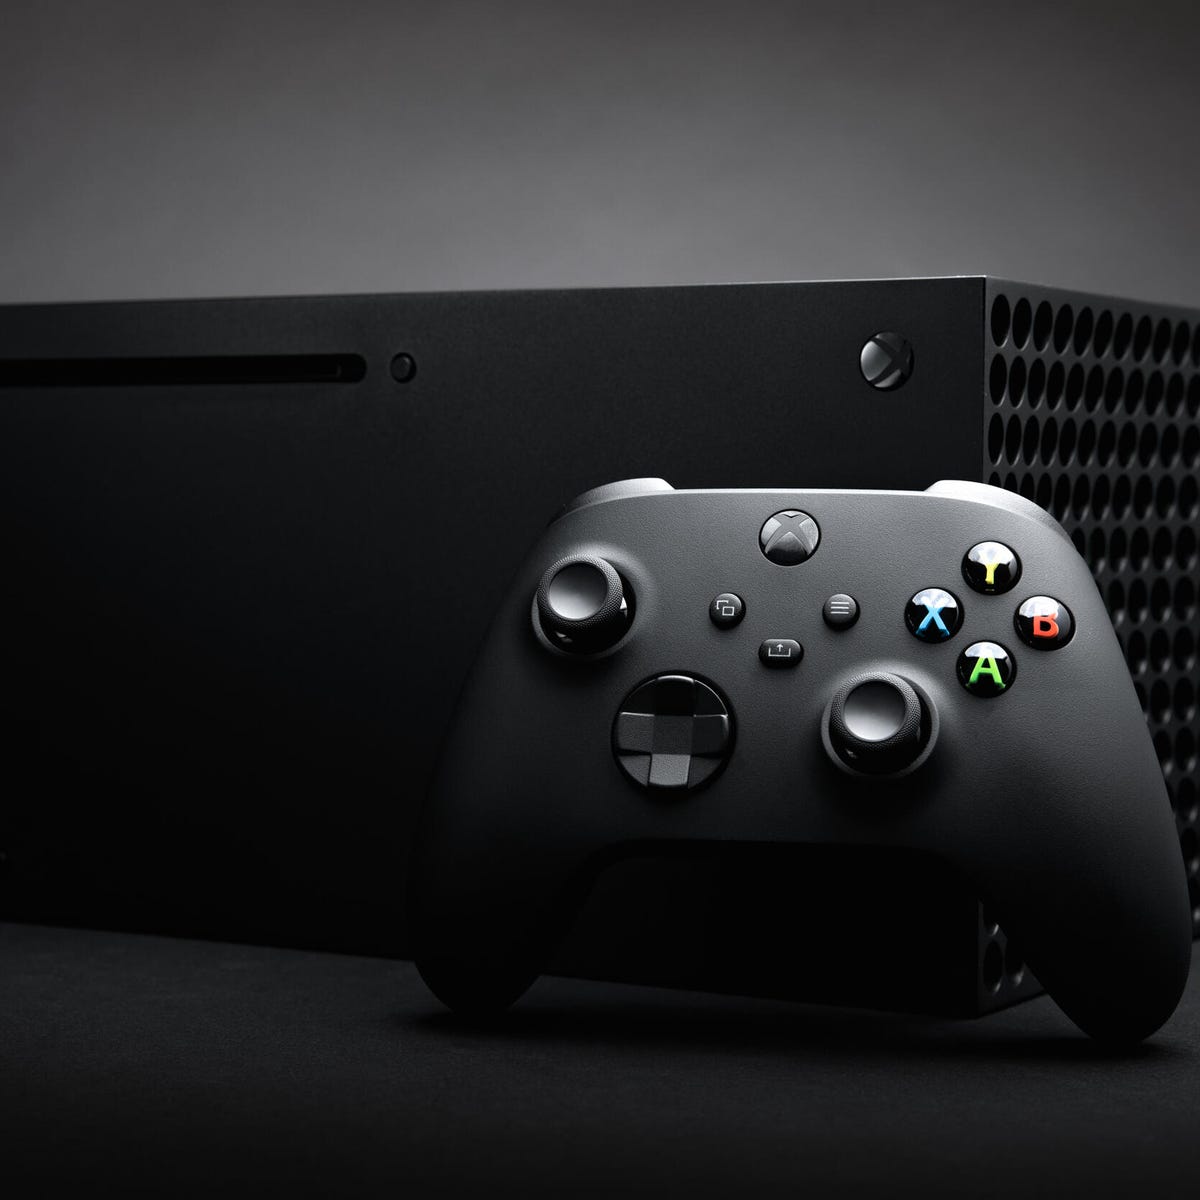 Xbox Series X Review: the $500 Console Is Great, but Not Essential